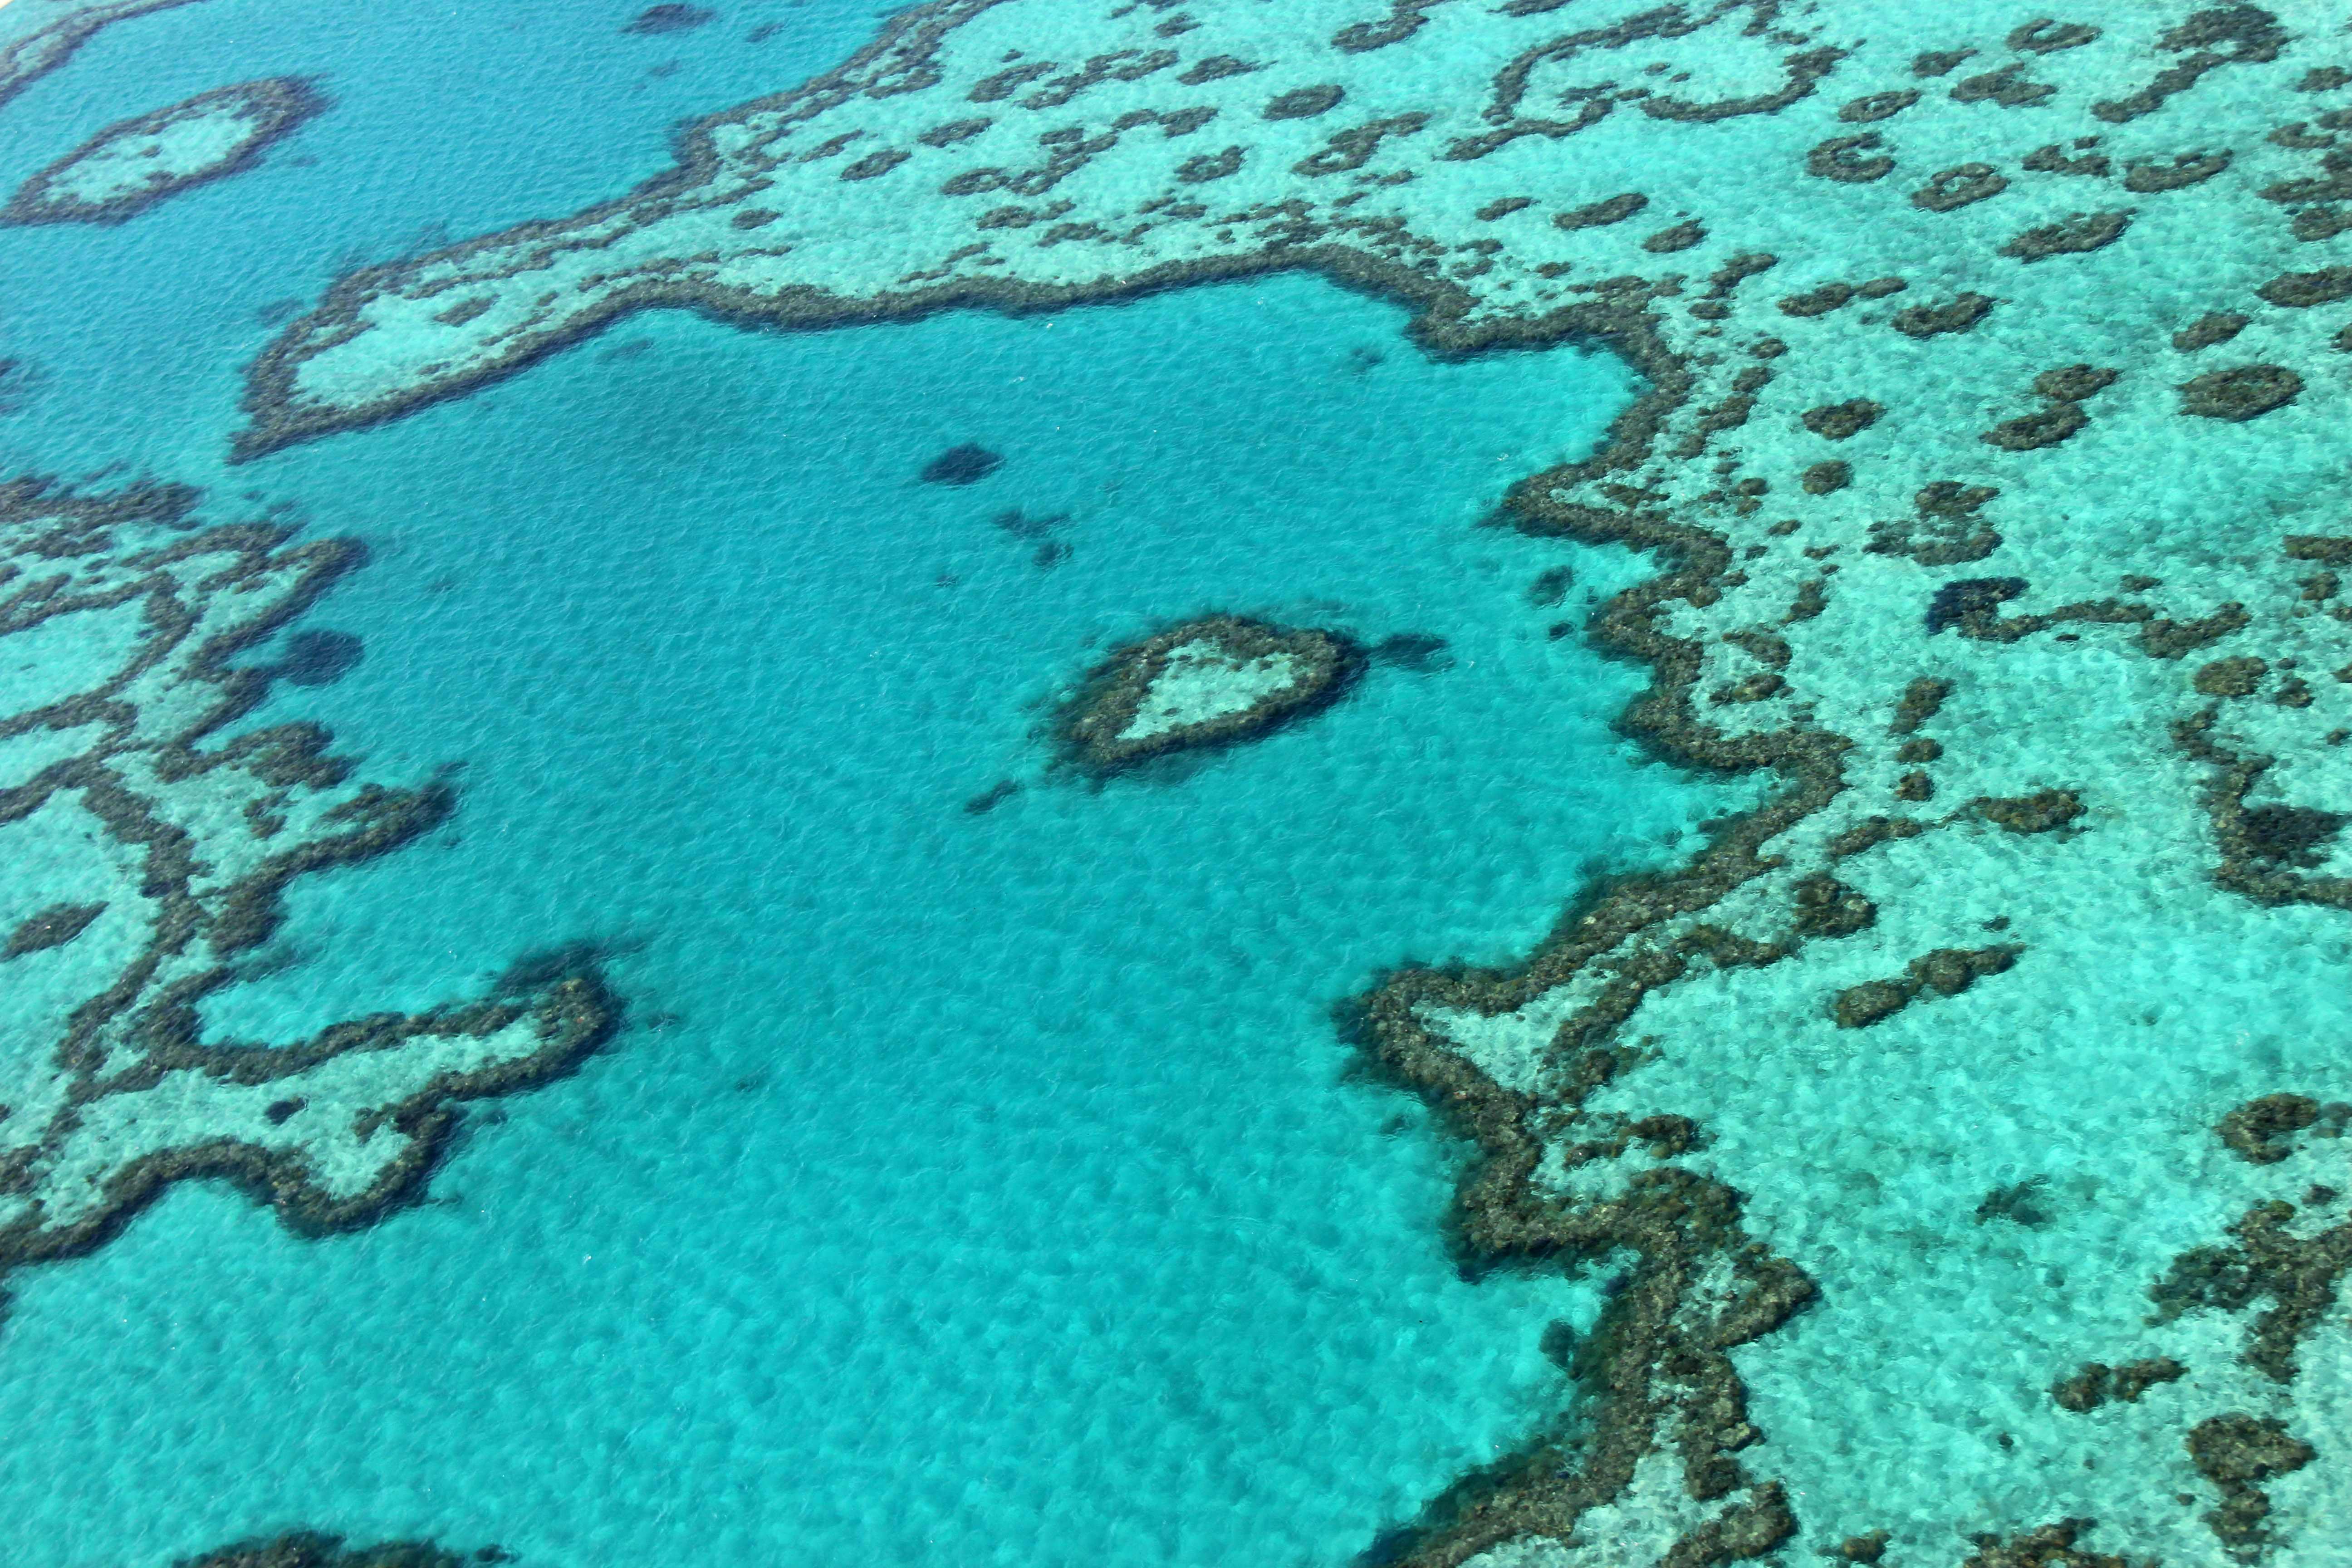 (FILES) This file photo taken on November 20, 2014, shows an aerial view of the Great Barrier Reef off the coast of the Whitsunday Islands, along the central coast of Queensland. - Climate change has become the biggest threat to UN-listed natural world heritage sites like glaciers and wetlands, and has pushed Australia's Great Barrier Reef into "critical" condition, conservationists said December 2, 2020. (Photo by Sarah LAI / AFP)